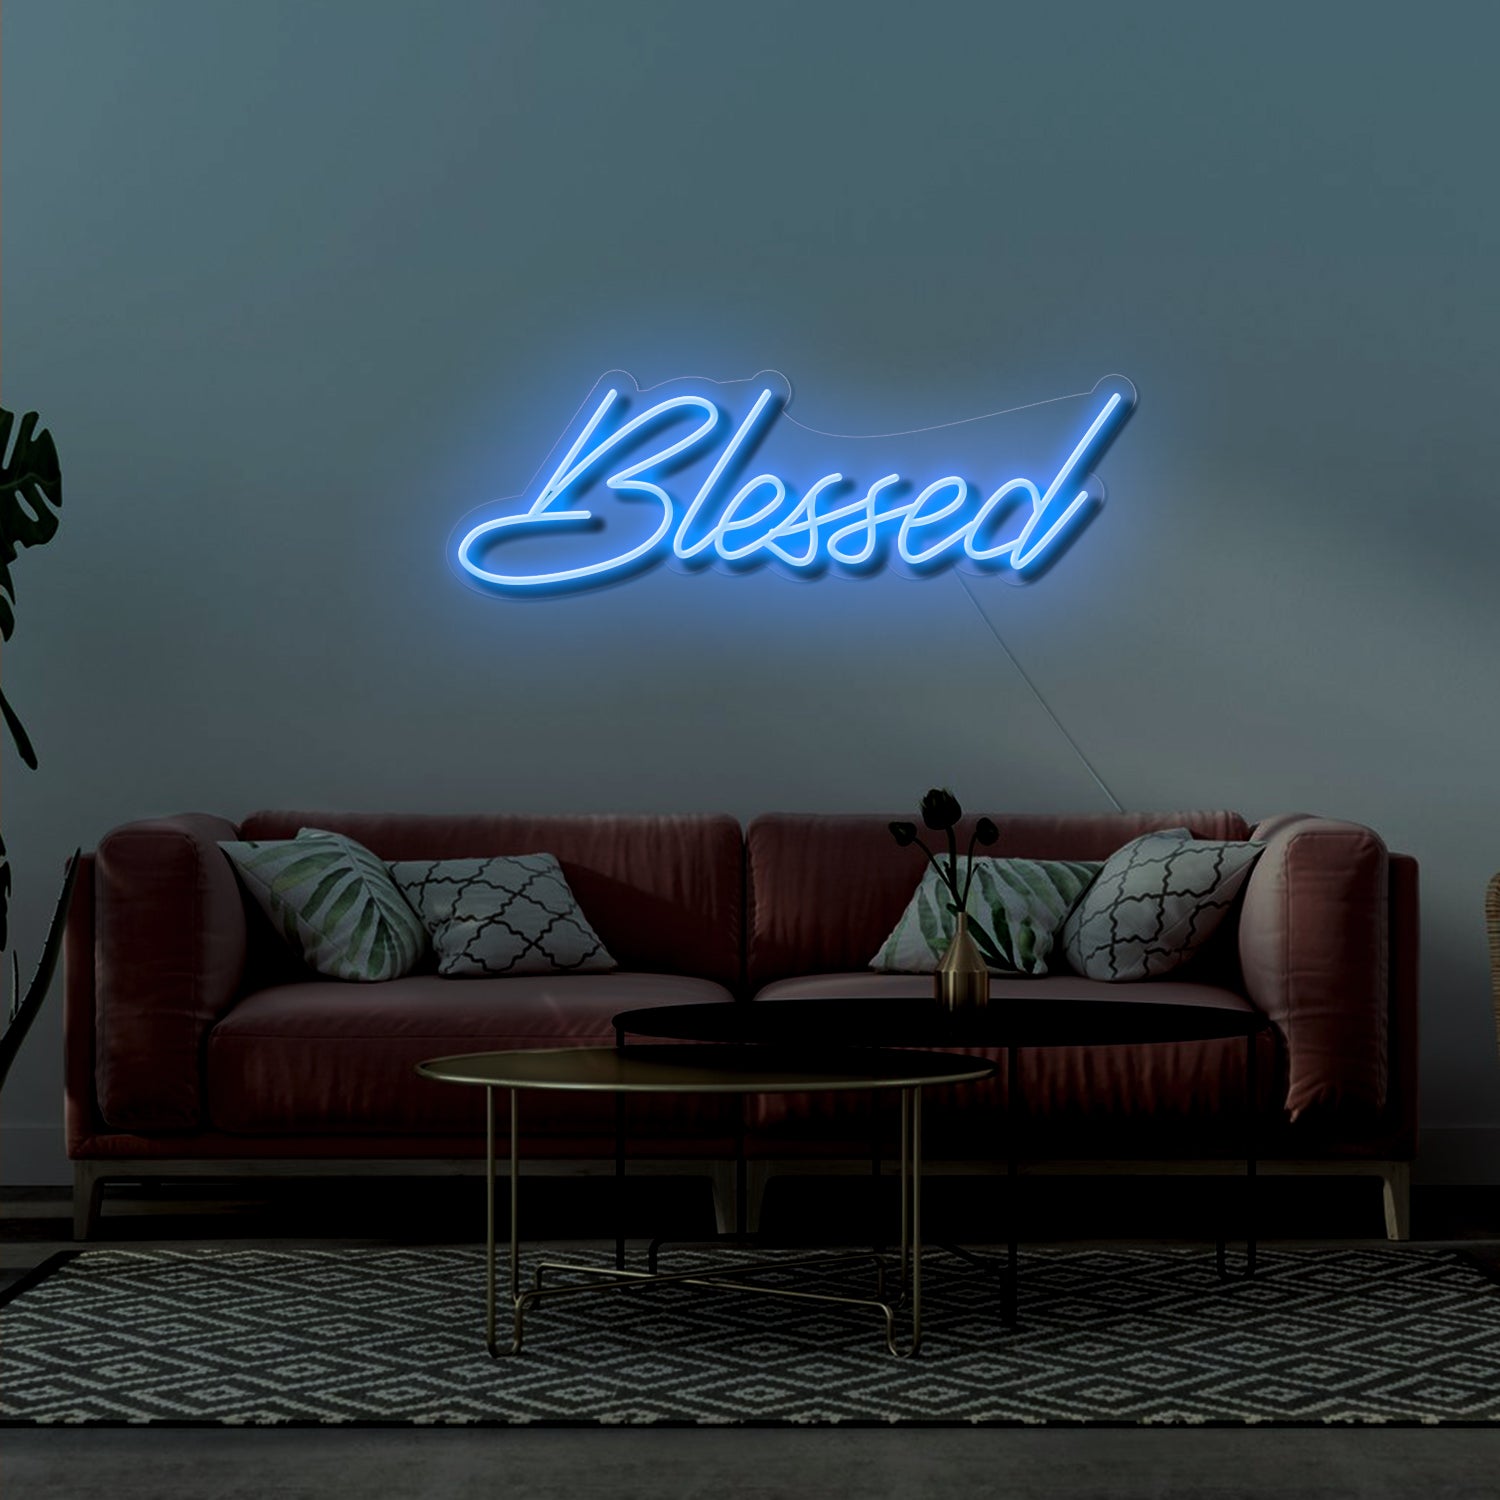 Blessed - neoon.eu